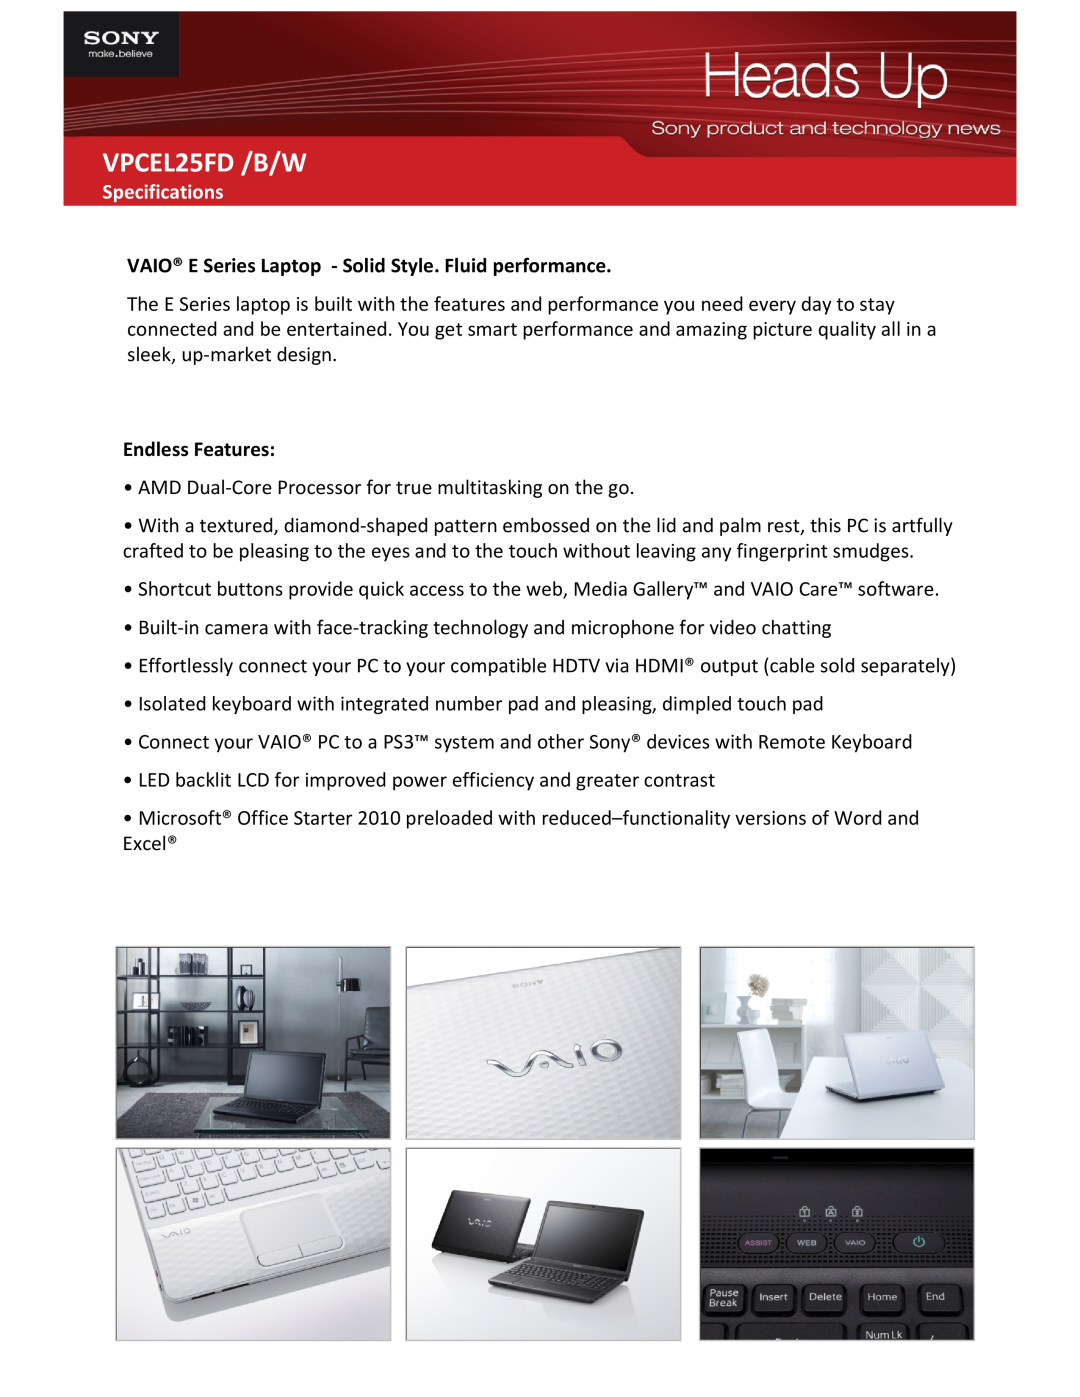 Sony VPCEL25FD /B/W specifications Specifications, VAIO E Series Laptop ‐ Solid Style. Fluid performance, Endless Features 